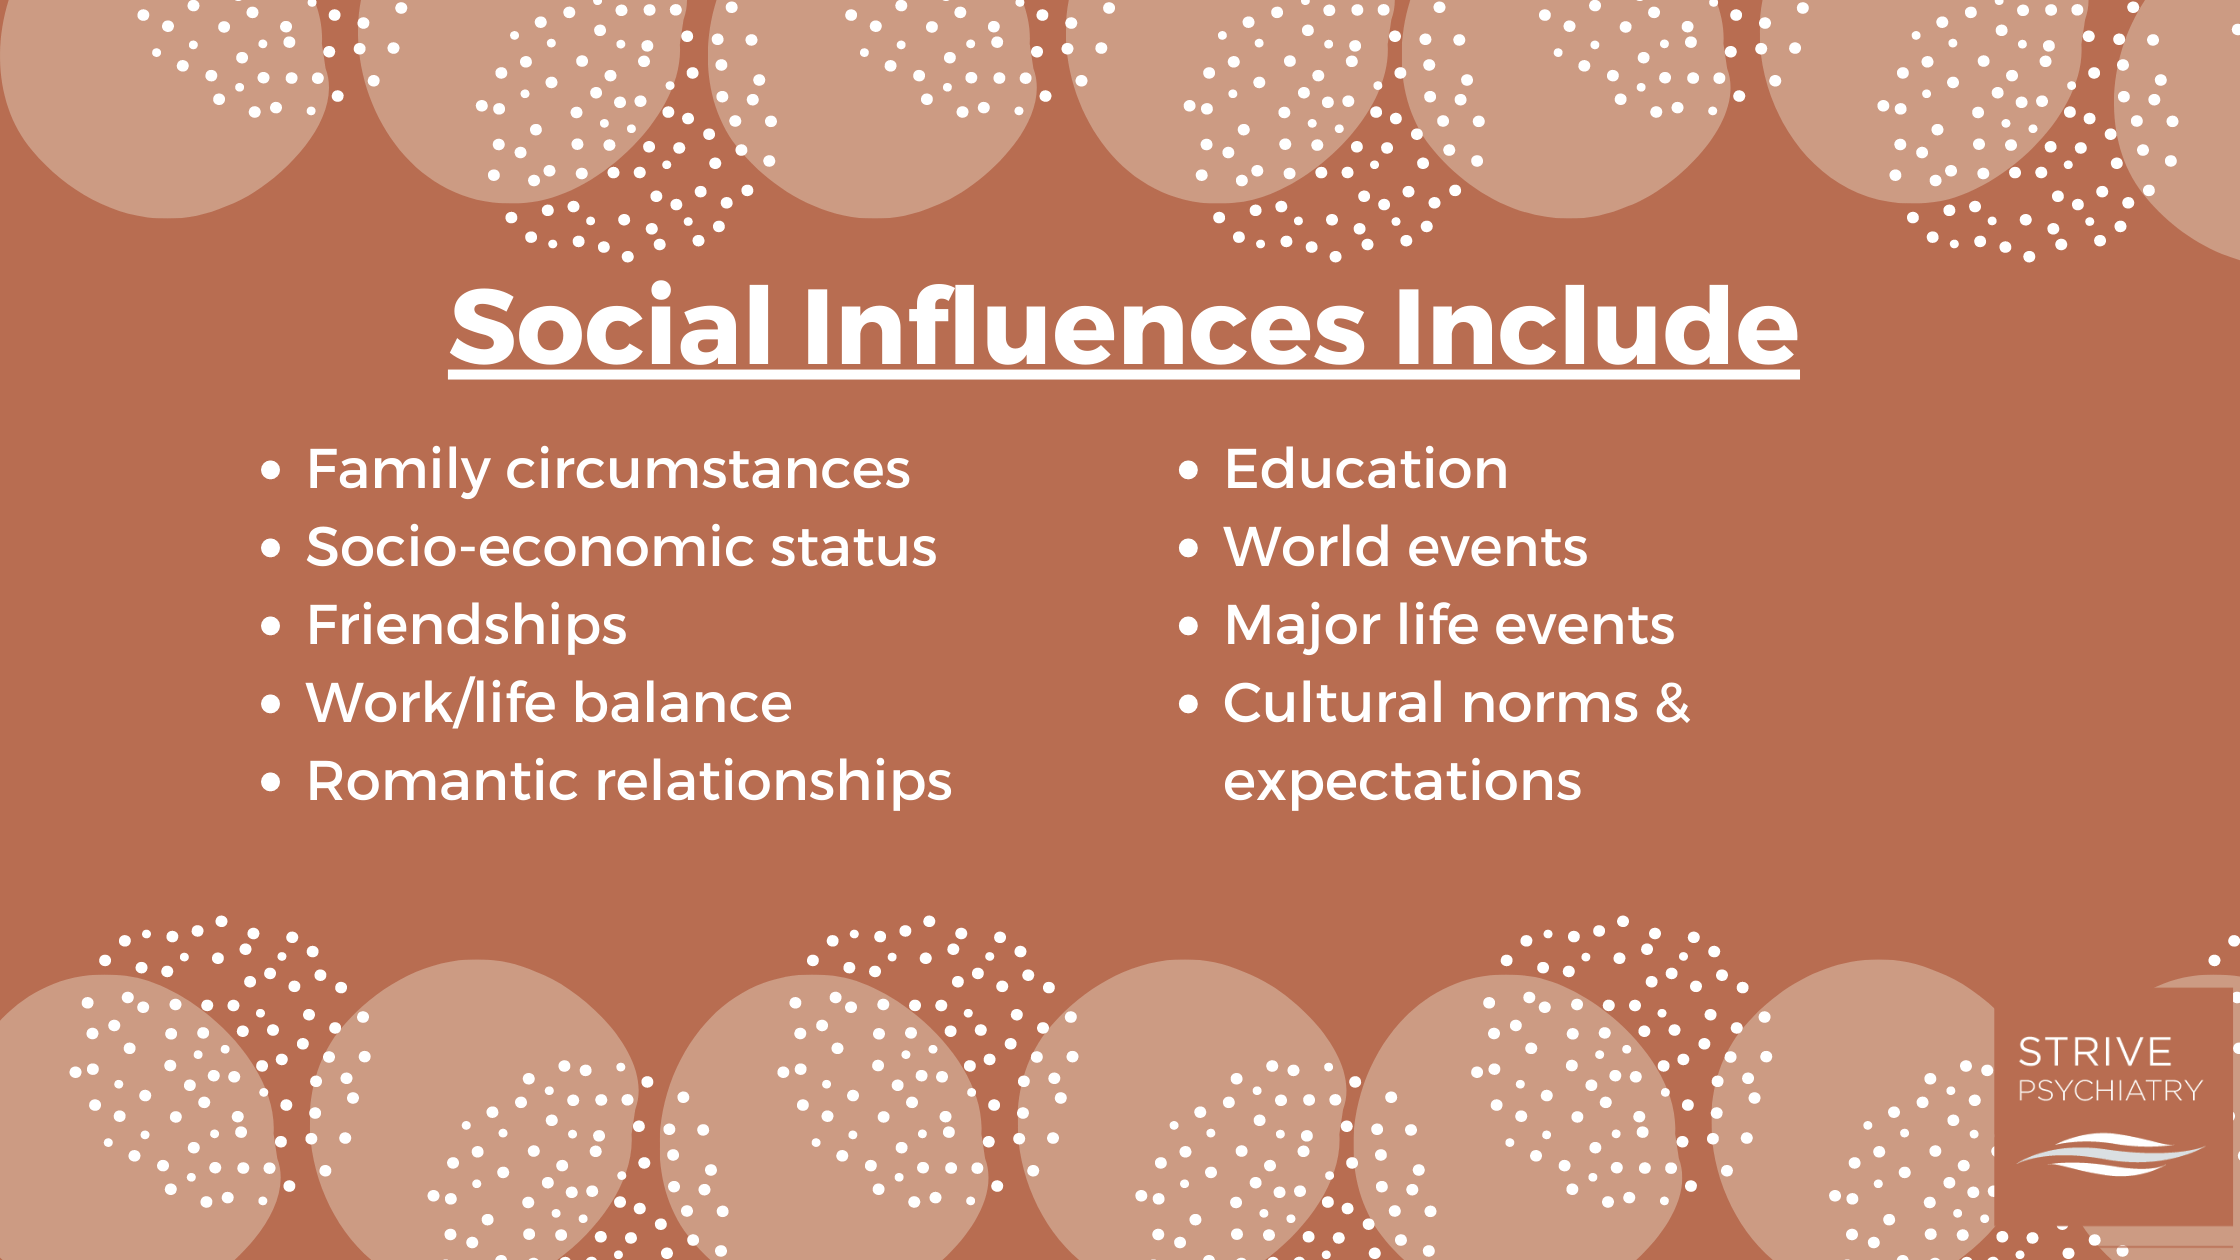 Infographic that says "social influences include: family circumstances, socio-economic status, friendships, work/life balance, romantic relationships, education, world events, major life events, cultural norms & expectations."